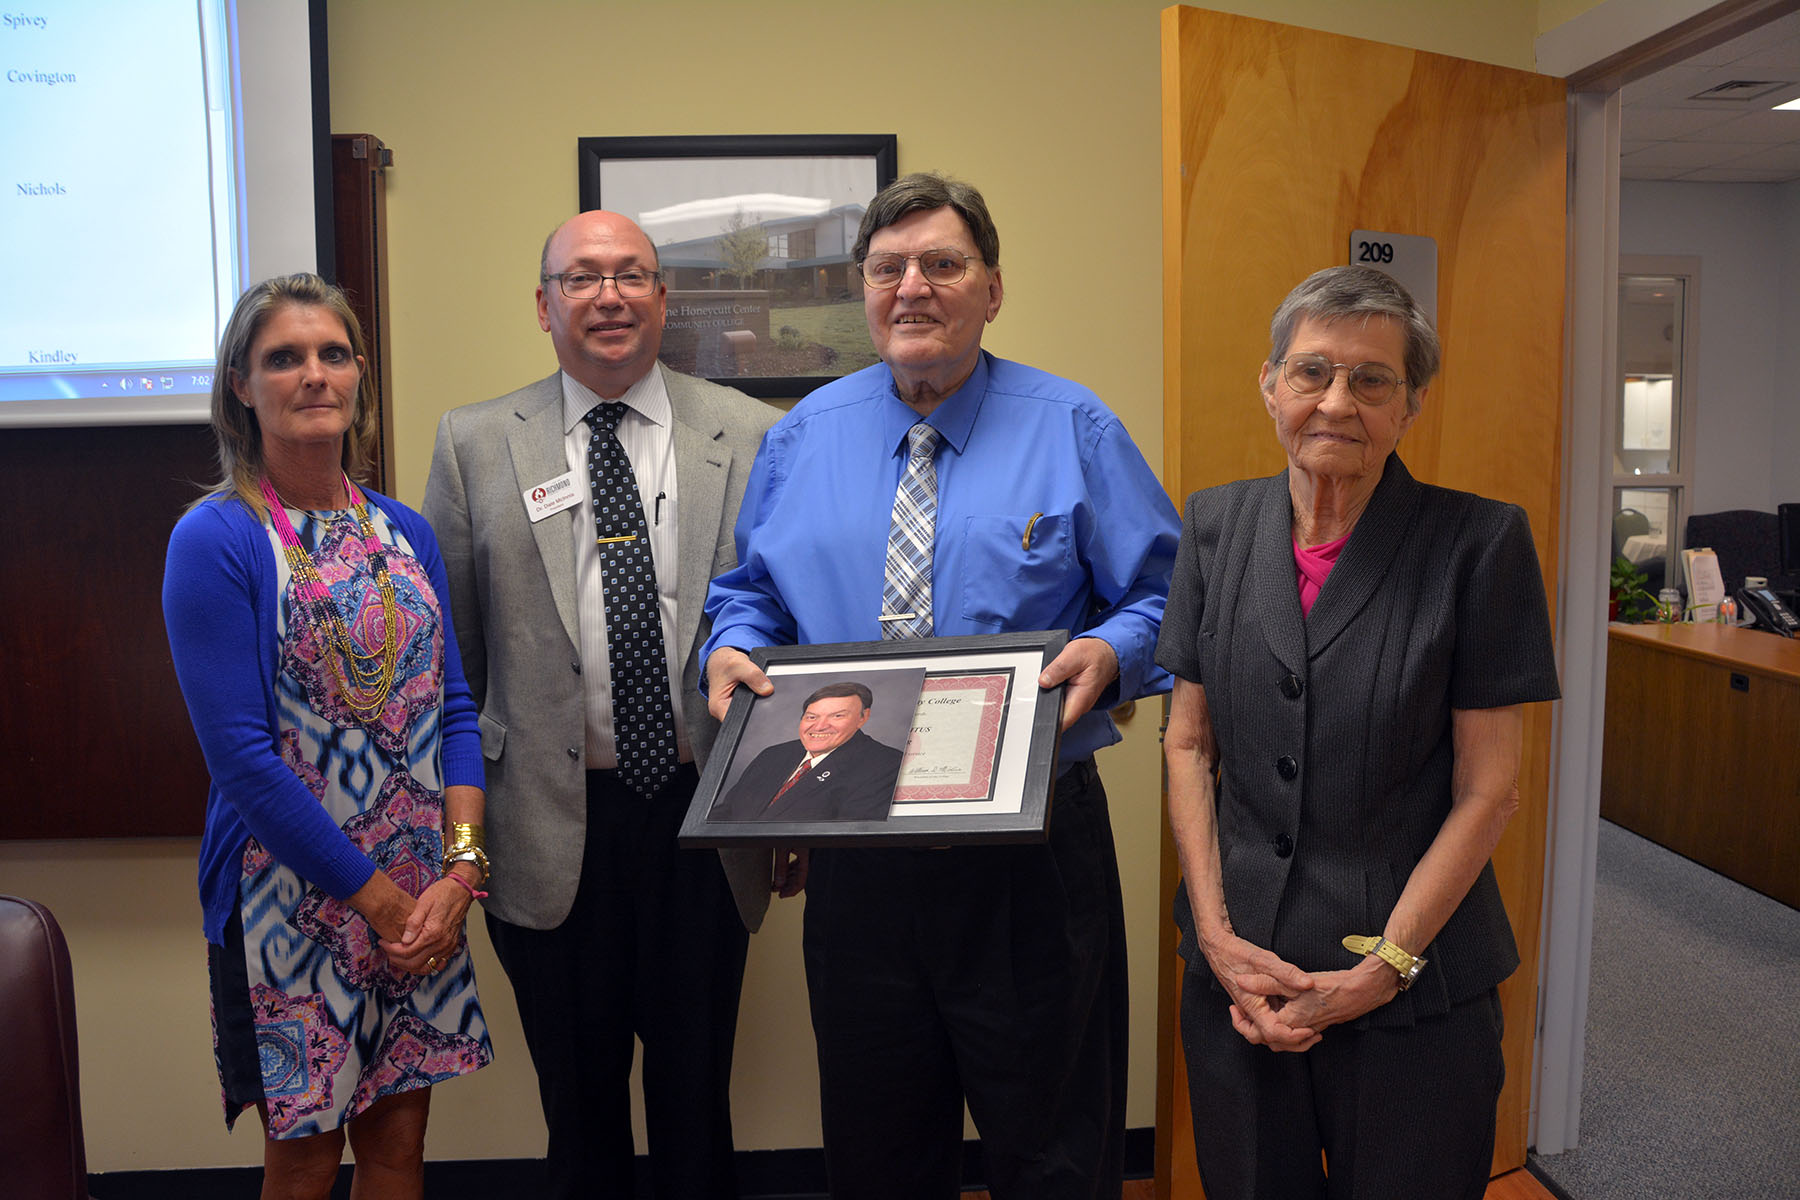 Retiring Richmond Community College Board of Trustee Bert Unger was honored at Tuesday’s board meeting and granted Trustee Emeritus status for his many years of service on the board. Pictured are, from left, Board Chair Claudia Robinette, Dr. Dale McInnis, Unger and Unger’s wife, Barbara.